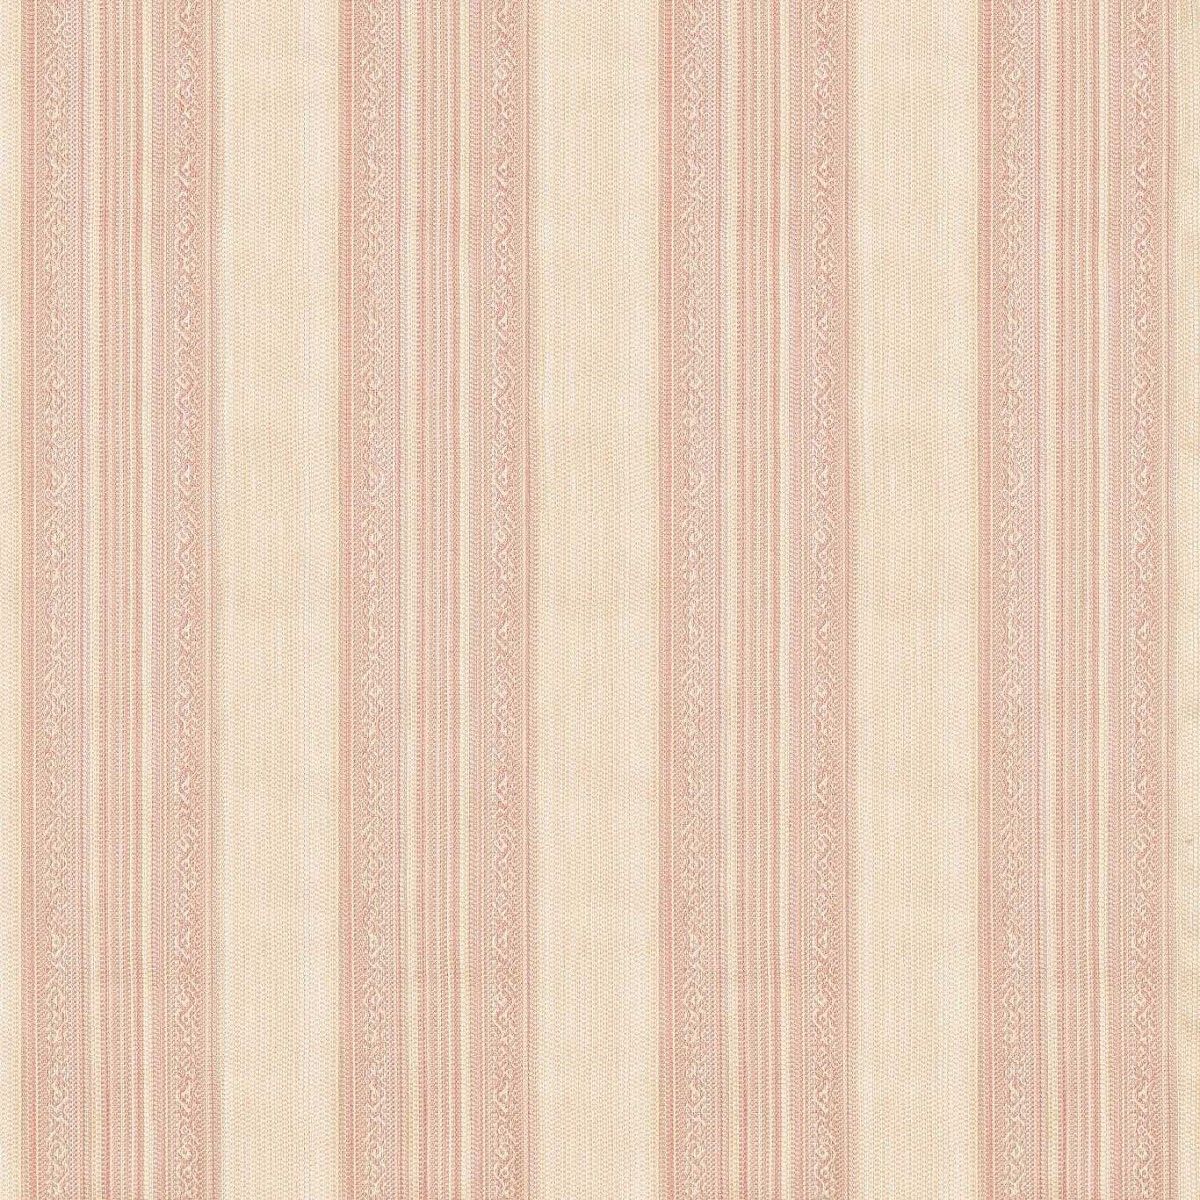 Hanover Stripe Tuscan Pink Fabric by Zoffany